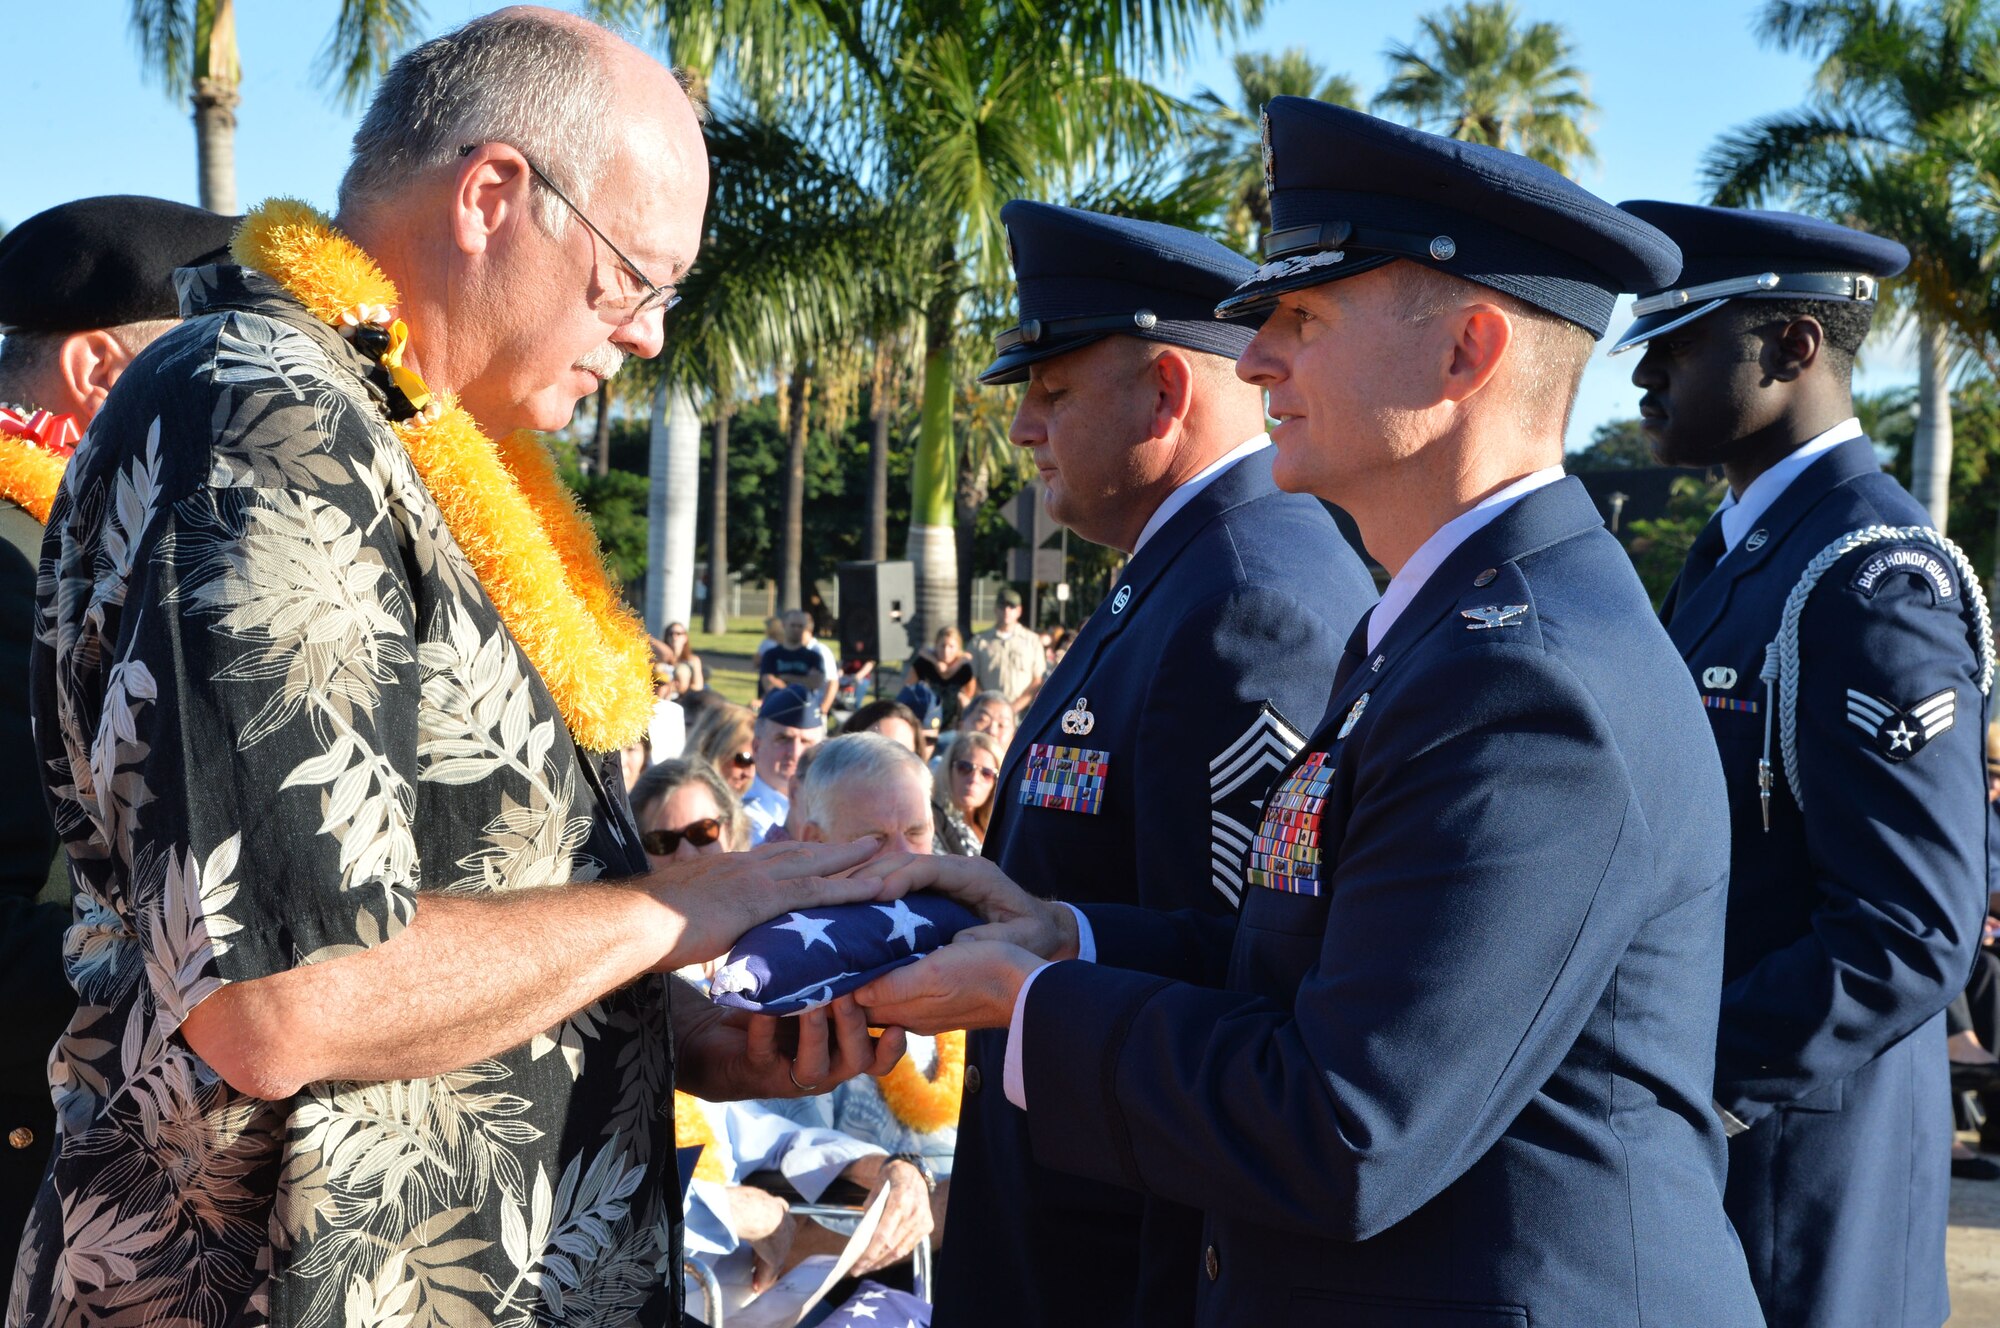 Col. Randy Huiss, right , presents an American flag to Thomas Shepherd during the 73rd Remembrance Ceremony at Joint Base Pearl Harbor-Hickam, Hawaii Dec. 7, 2014. Shepherd is the son of an Army Air Corpsman who survived the attacks on Hickam Field Dec. 7, 1941. More than 50 survivors and family members of survivors attended the ceremony, which honored the 189 Airmen who lost their lives in the attack. Huiss is the 15th Wing commander. (U.S. Air Force photo/Staff Sgt. Alexander Martinez)